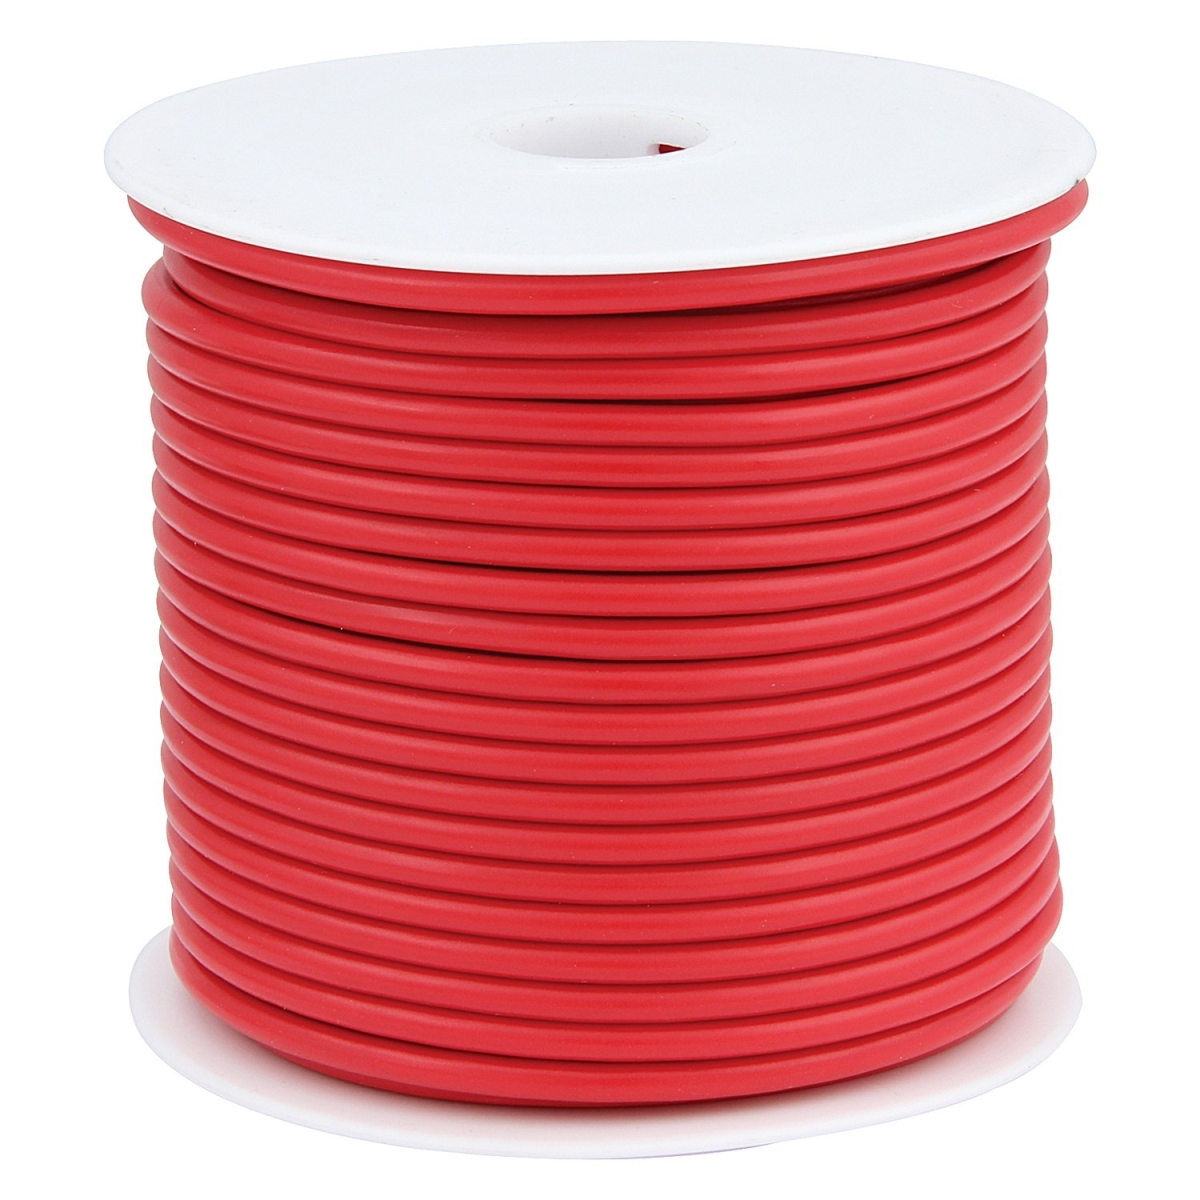 All76565 100 Ft. 12 Awg Red Primary Wire